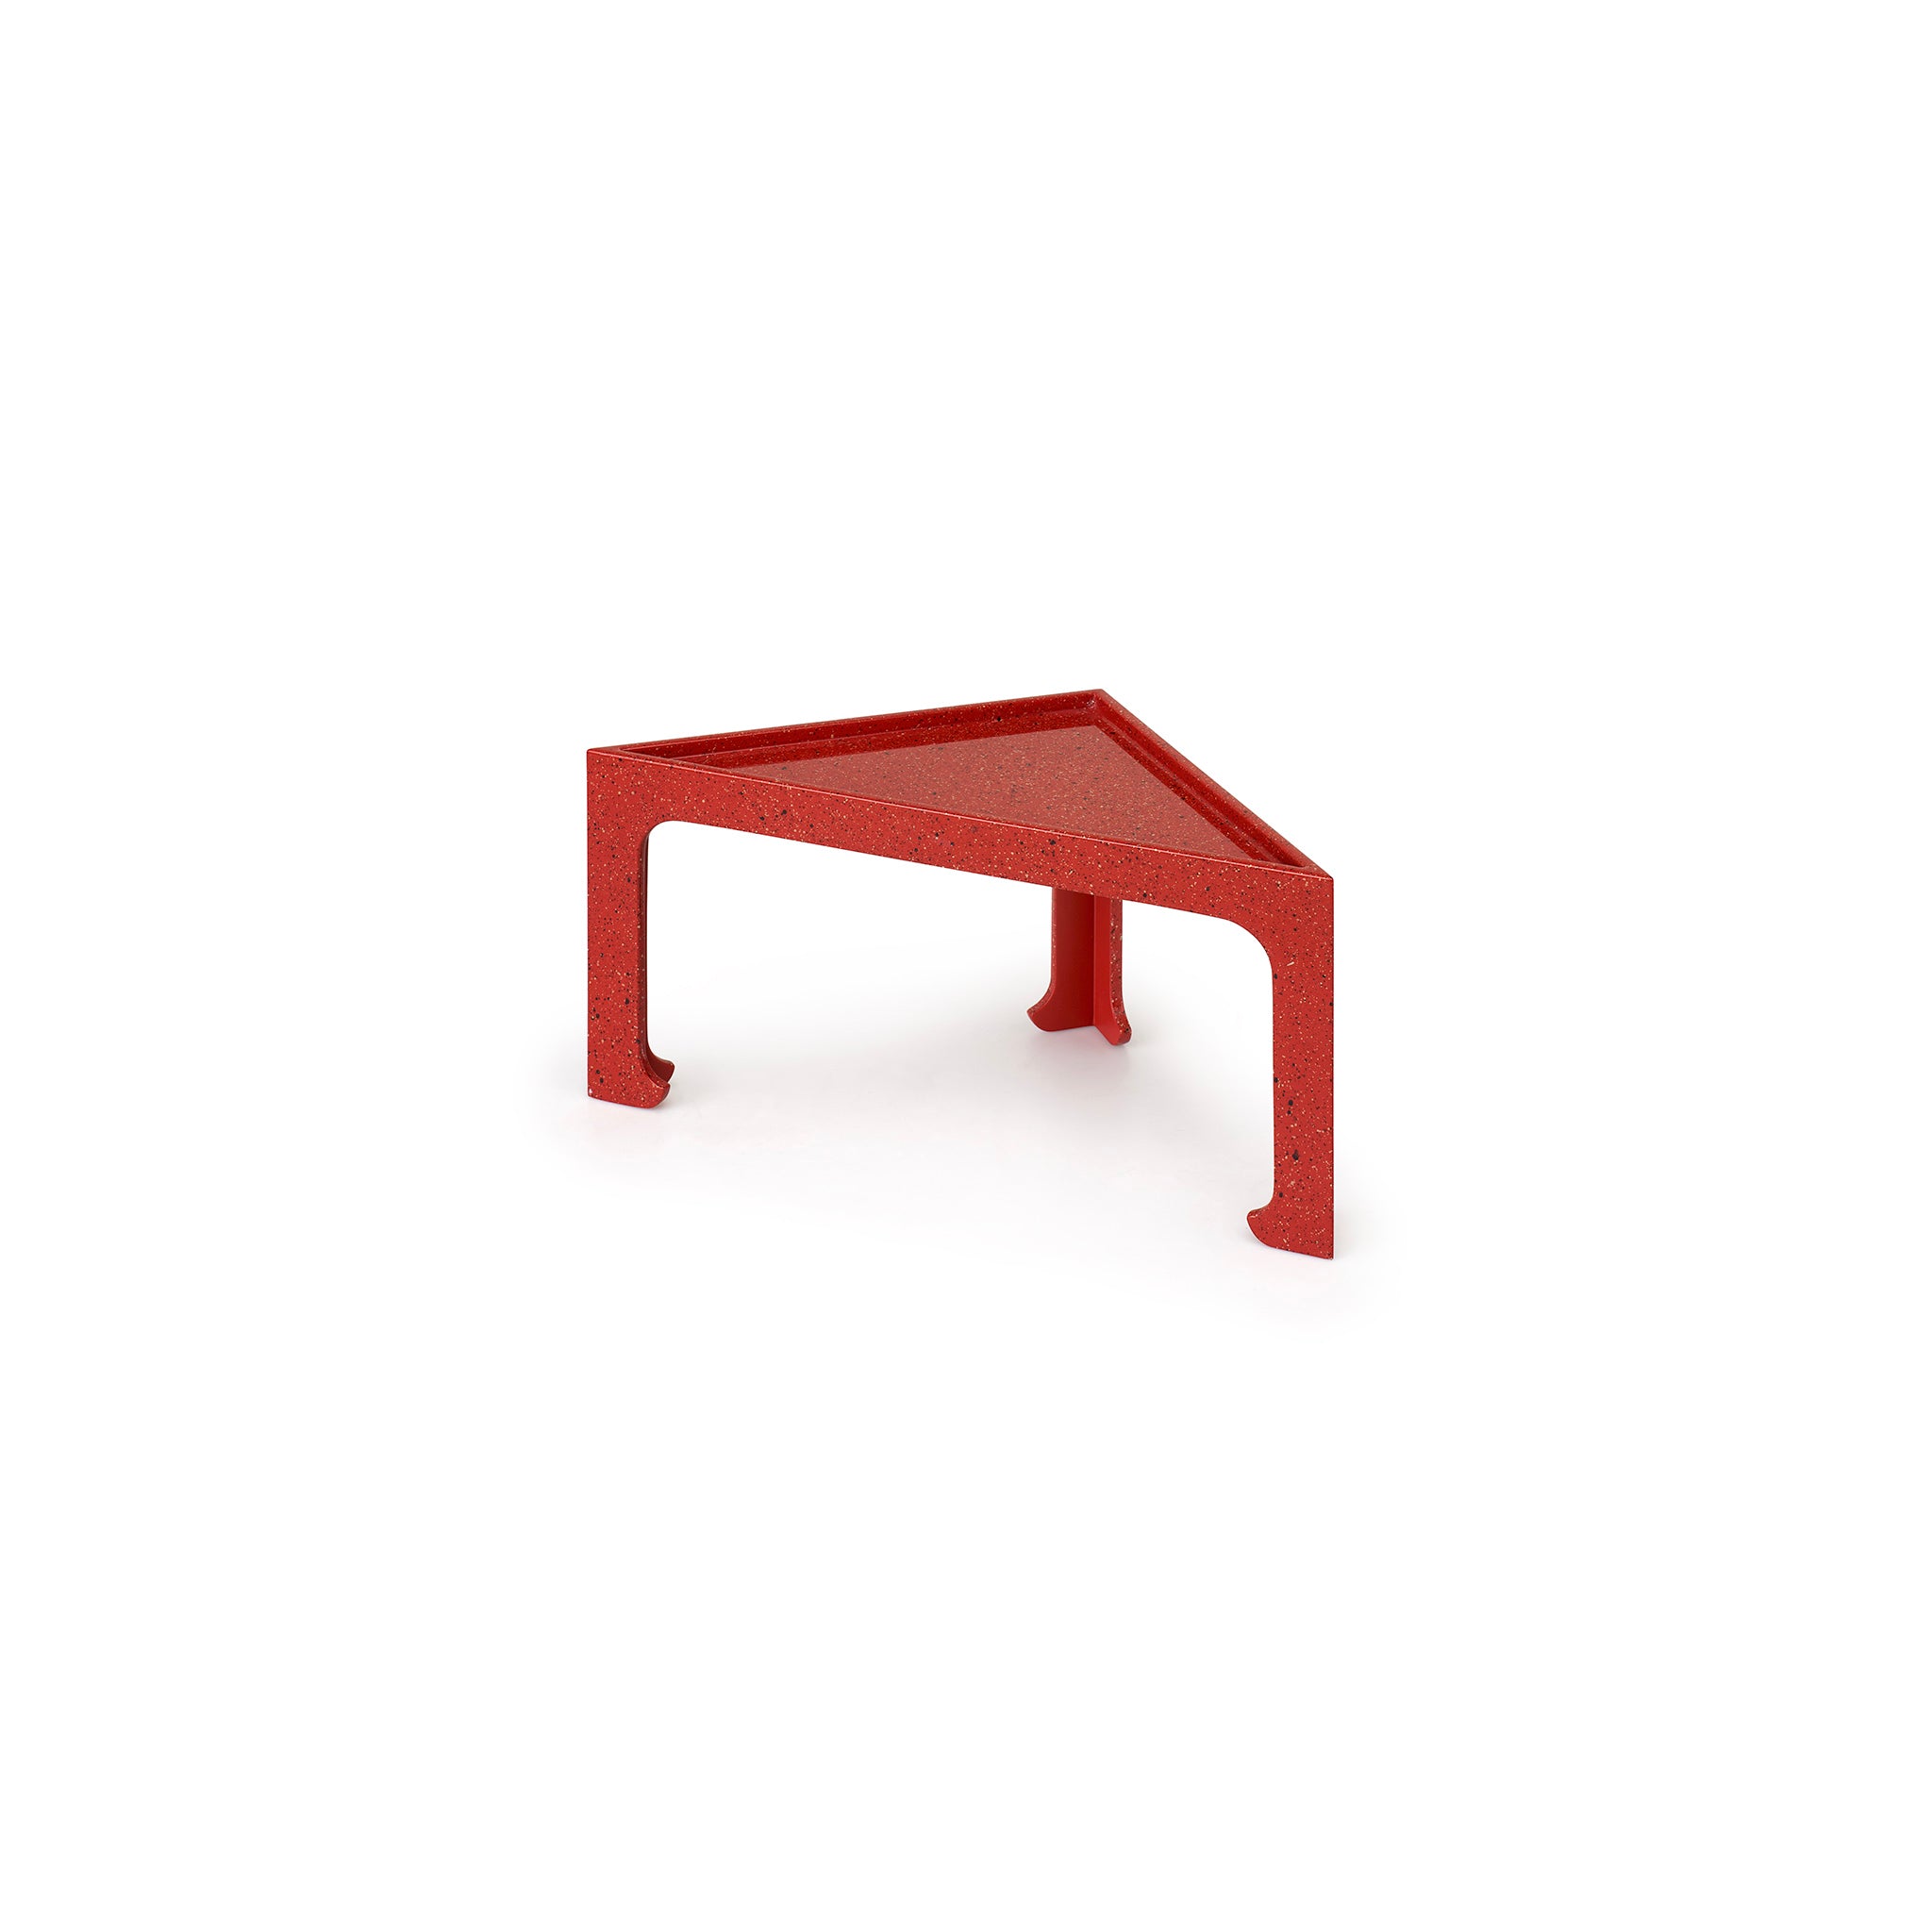 Lacquer Triangular Stacking Tables